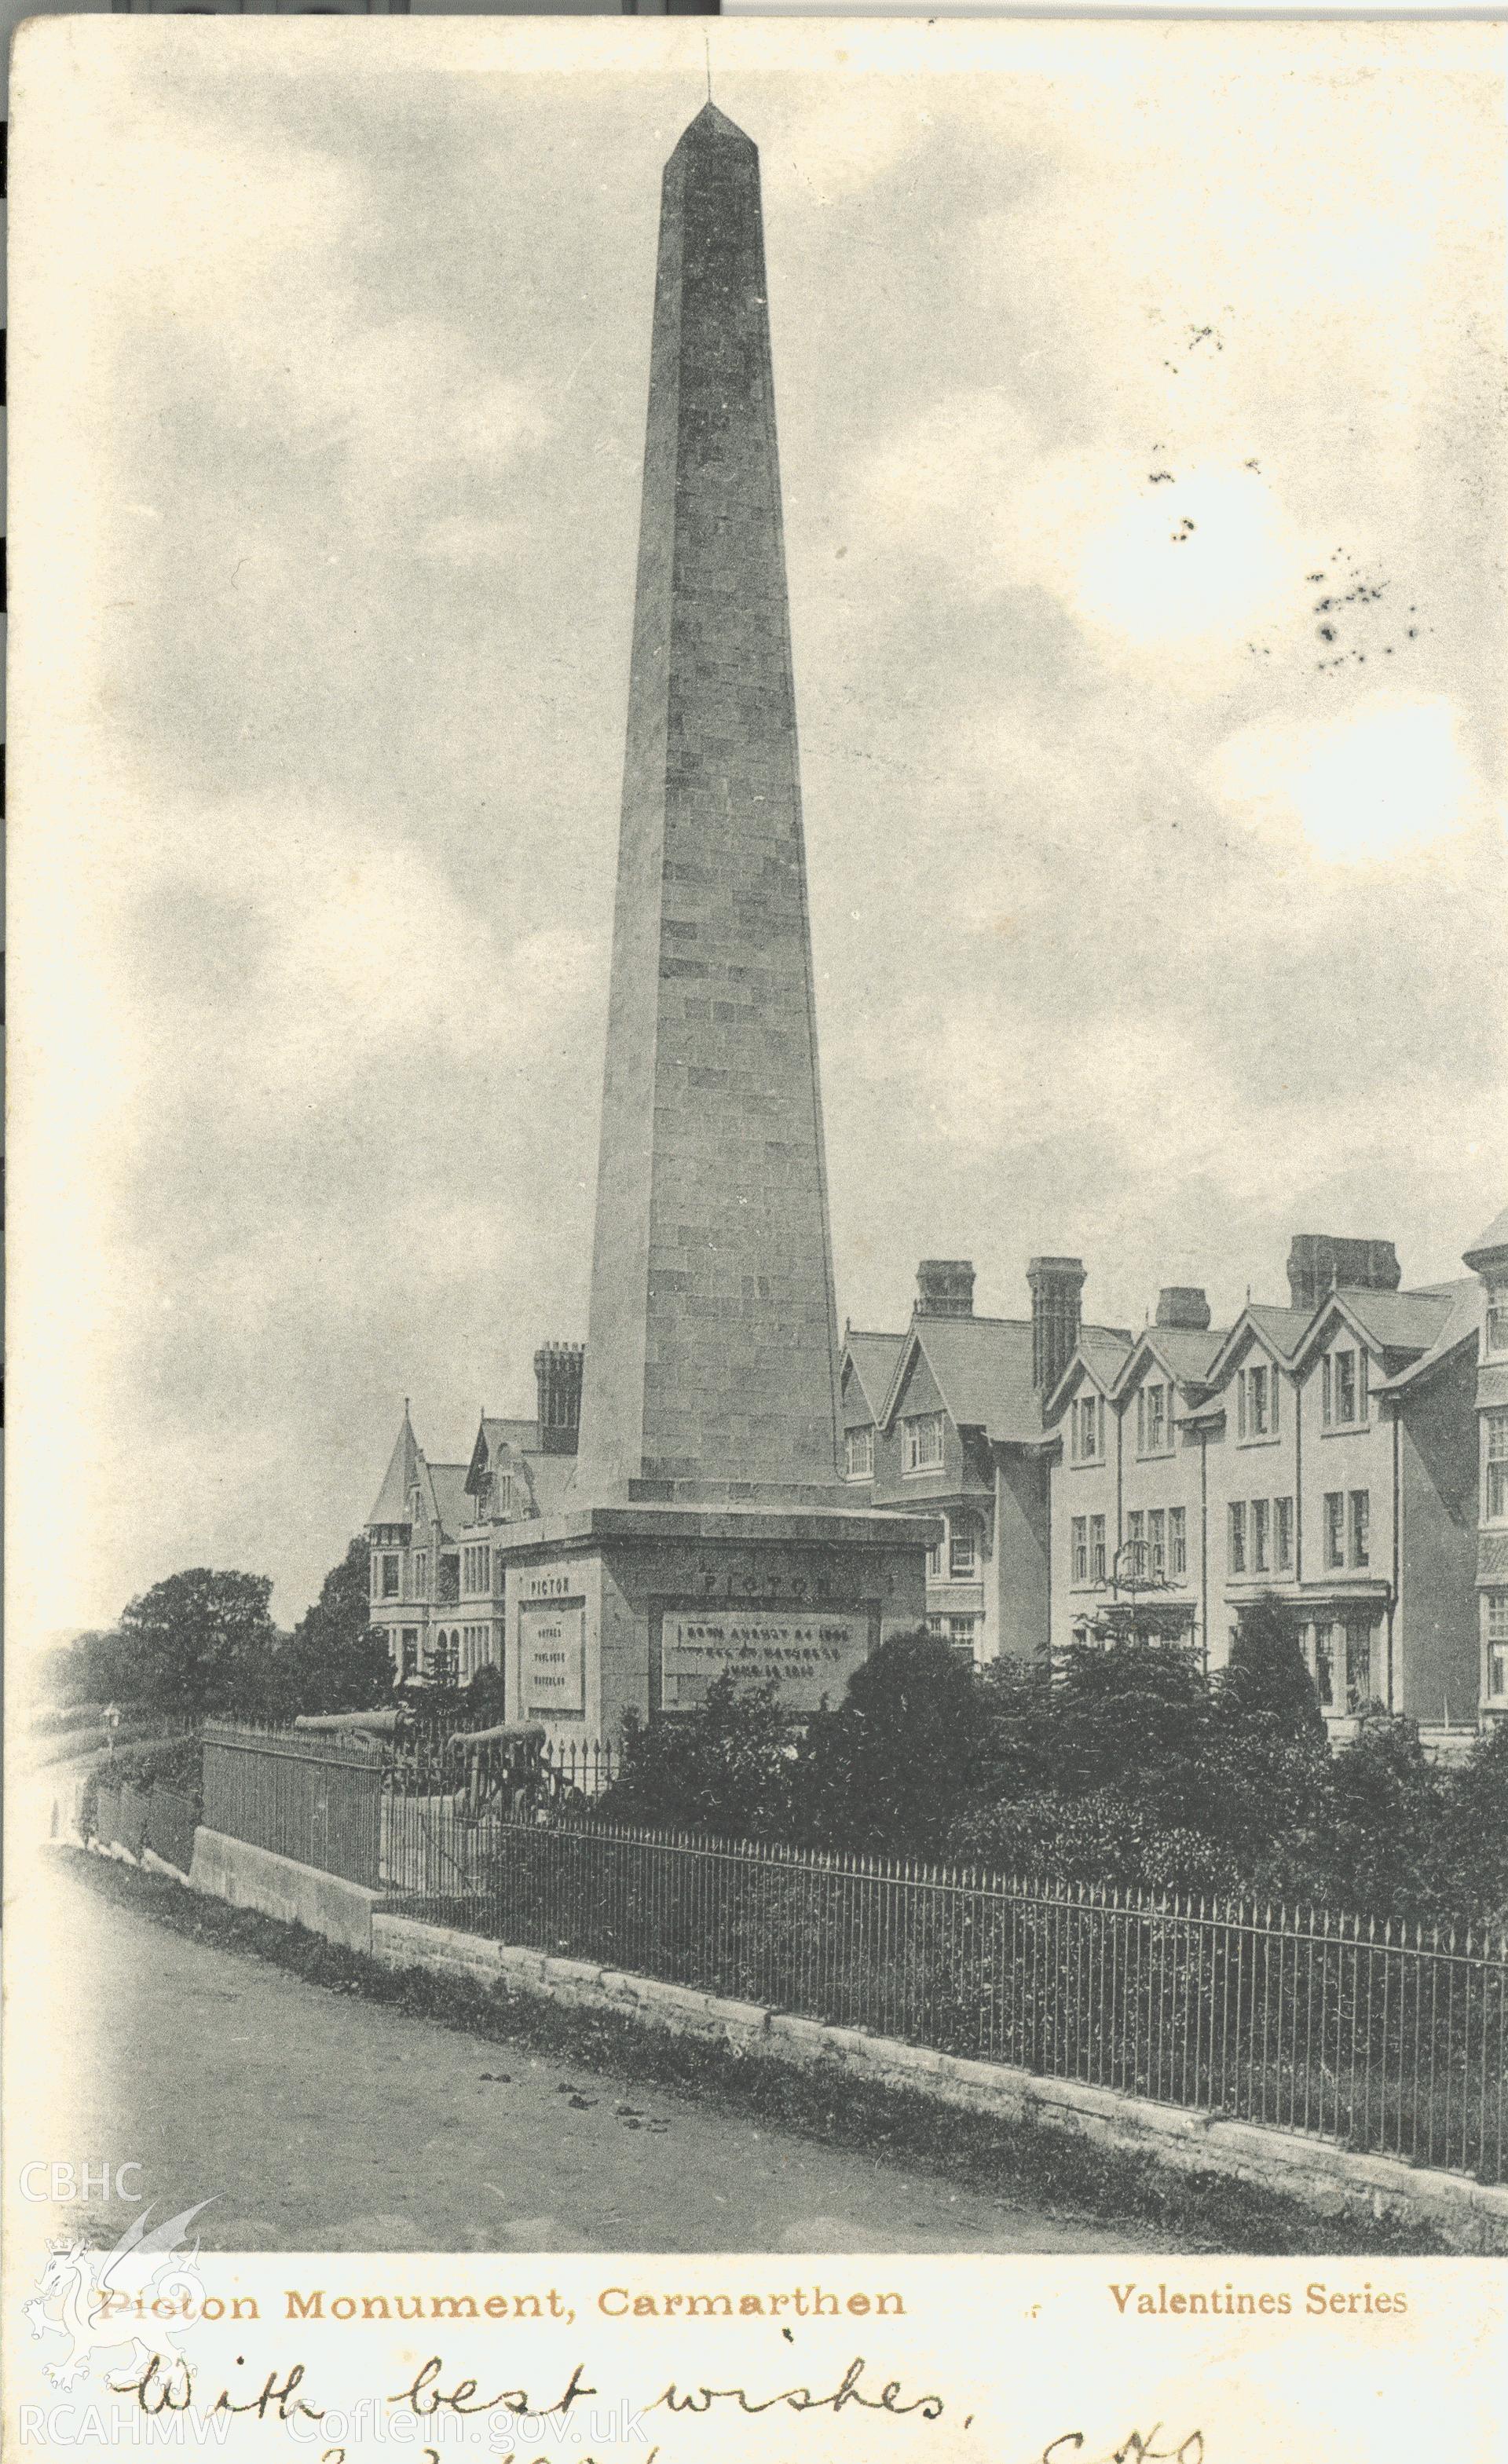 Digitised postcard image of The Picton Monument, Slebech, Valentine's Series. Produced by Parks and Gardens Data Services, from an original item in the Peter Davis Collection at Parks and Gardens UK. We hold only web-resolution images of this collection, suitable for viewing on screen and for research purposes only. We do not hold the original images, or publication quality scans.